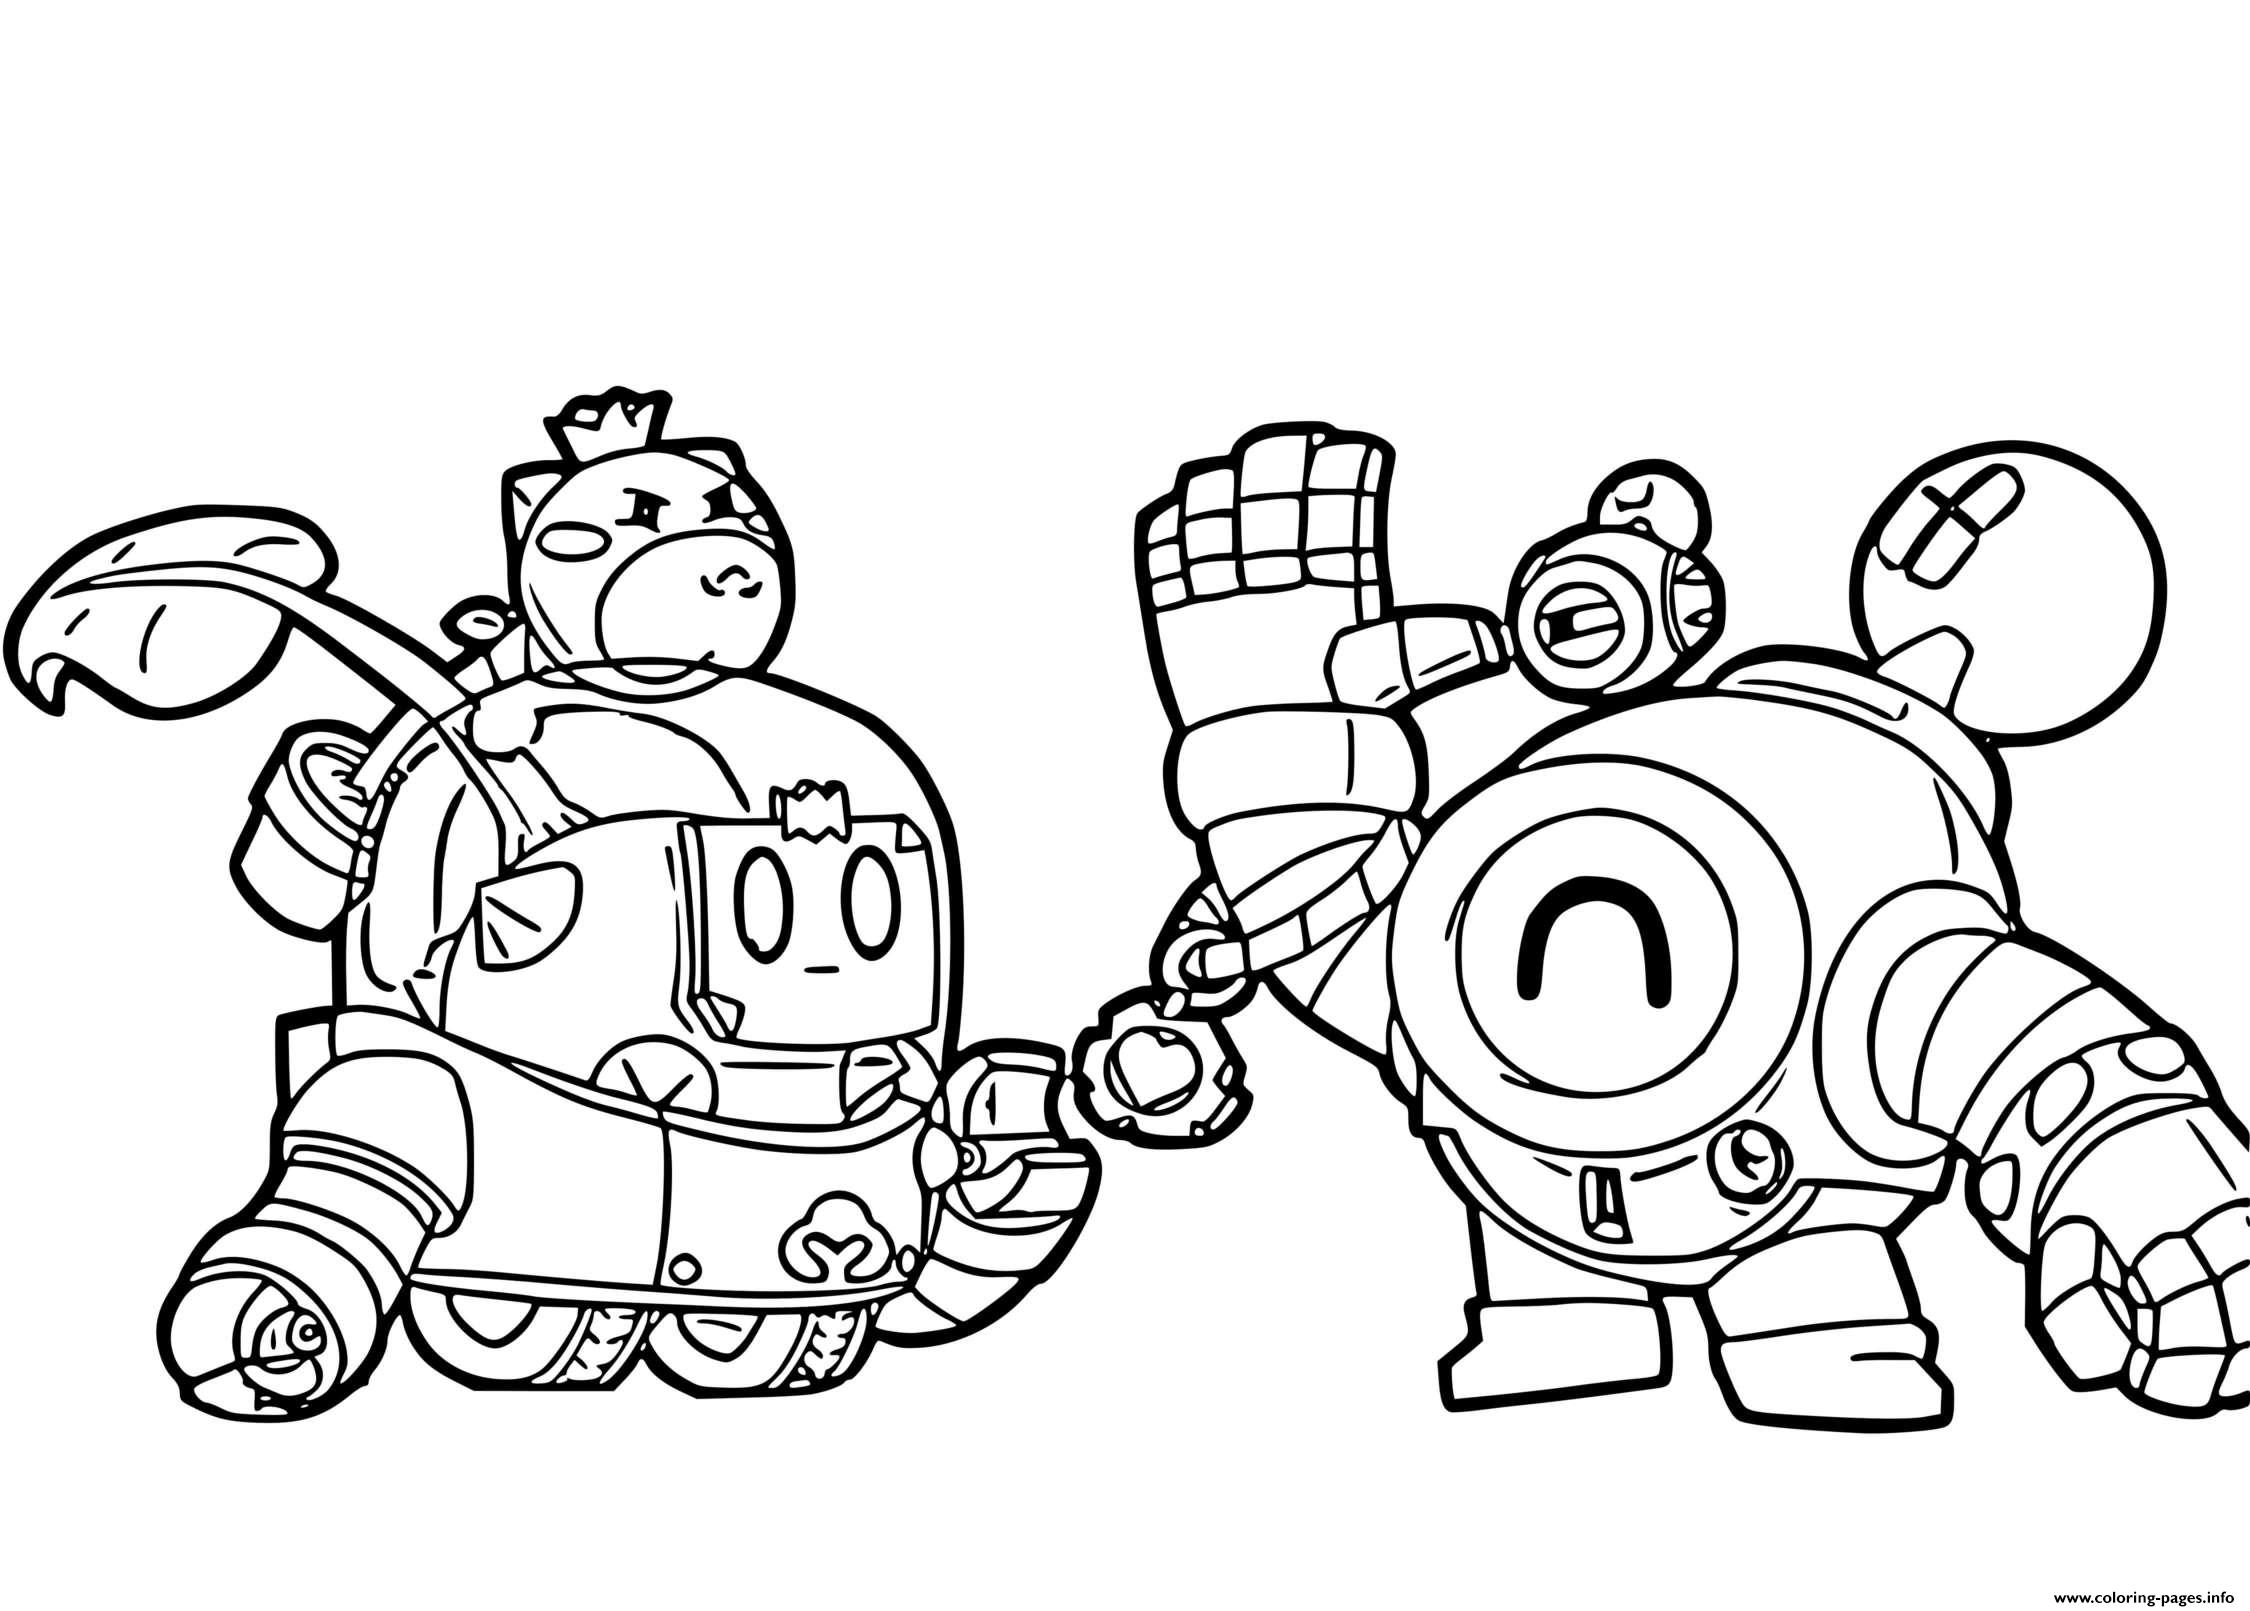 Sprout Et Nani Brawl Stars Coloring Pages Printable - brawl stars colo